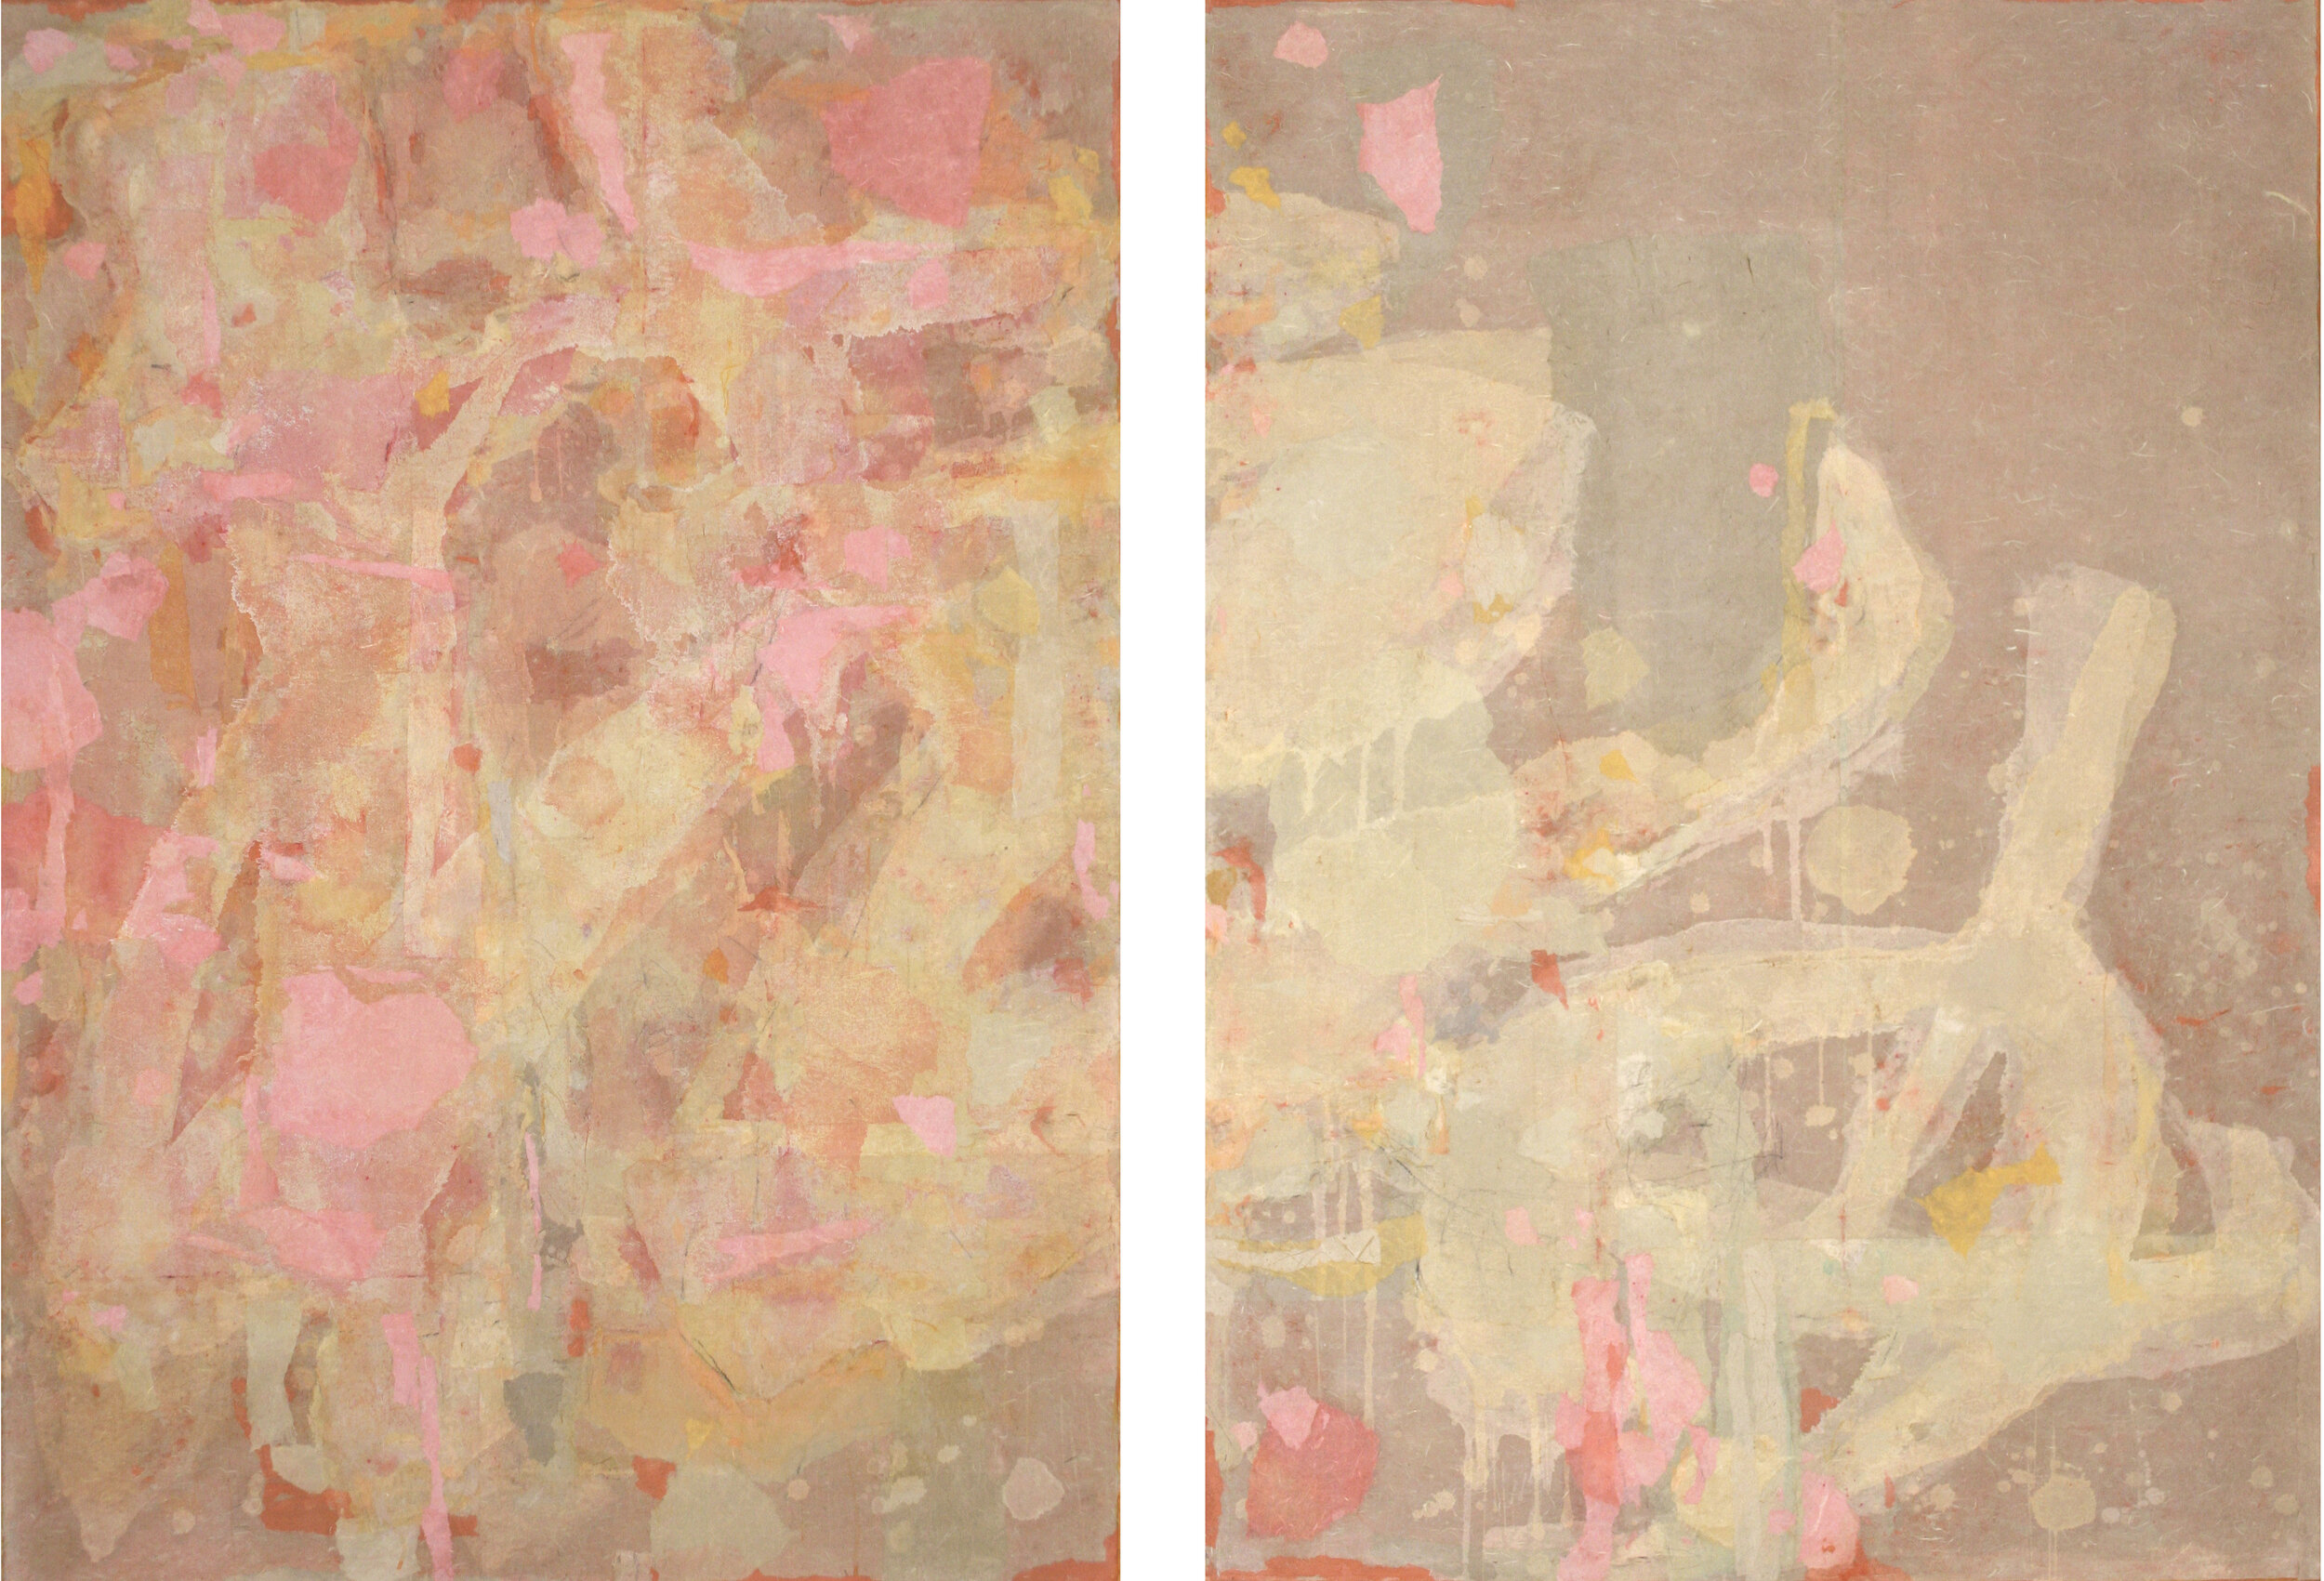  Wei Jia,  No. 13144 , 2013. Gouache, charcoal, pastel and Xuan paper collage on canvas, two panels, each 68 x 48 inches; 136 x 96 inches ©Wei Jia, courtesy Fou Gallery   